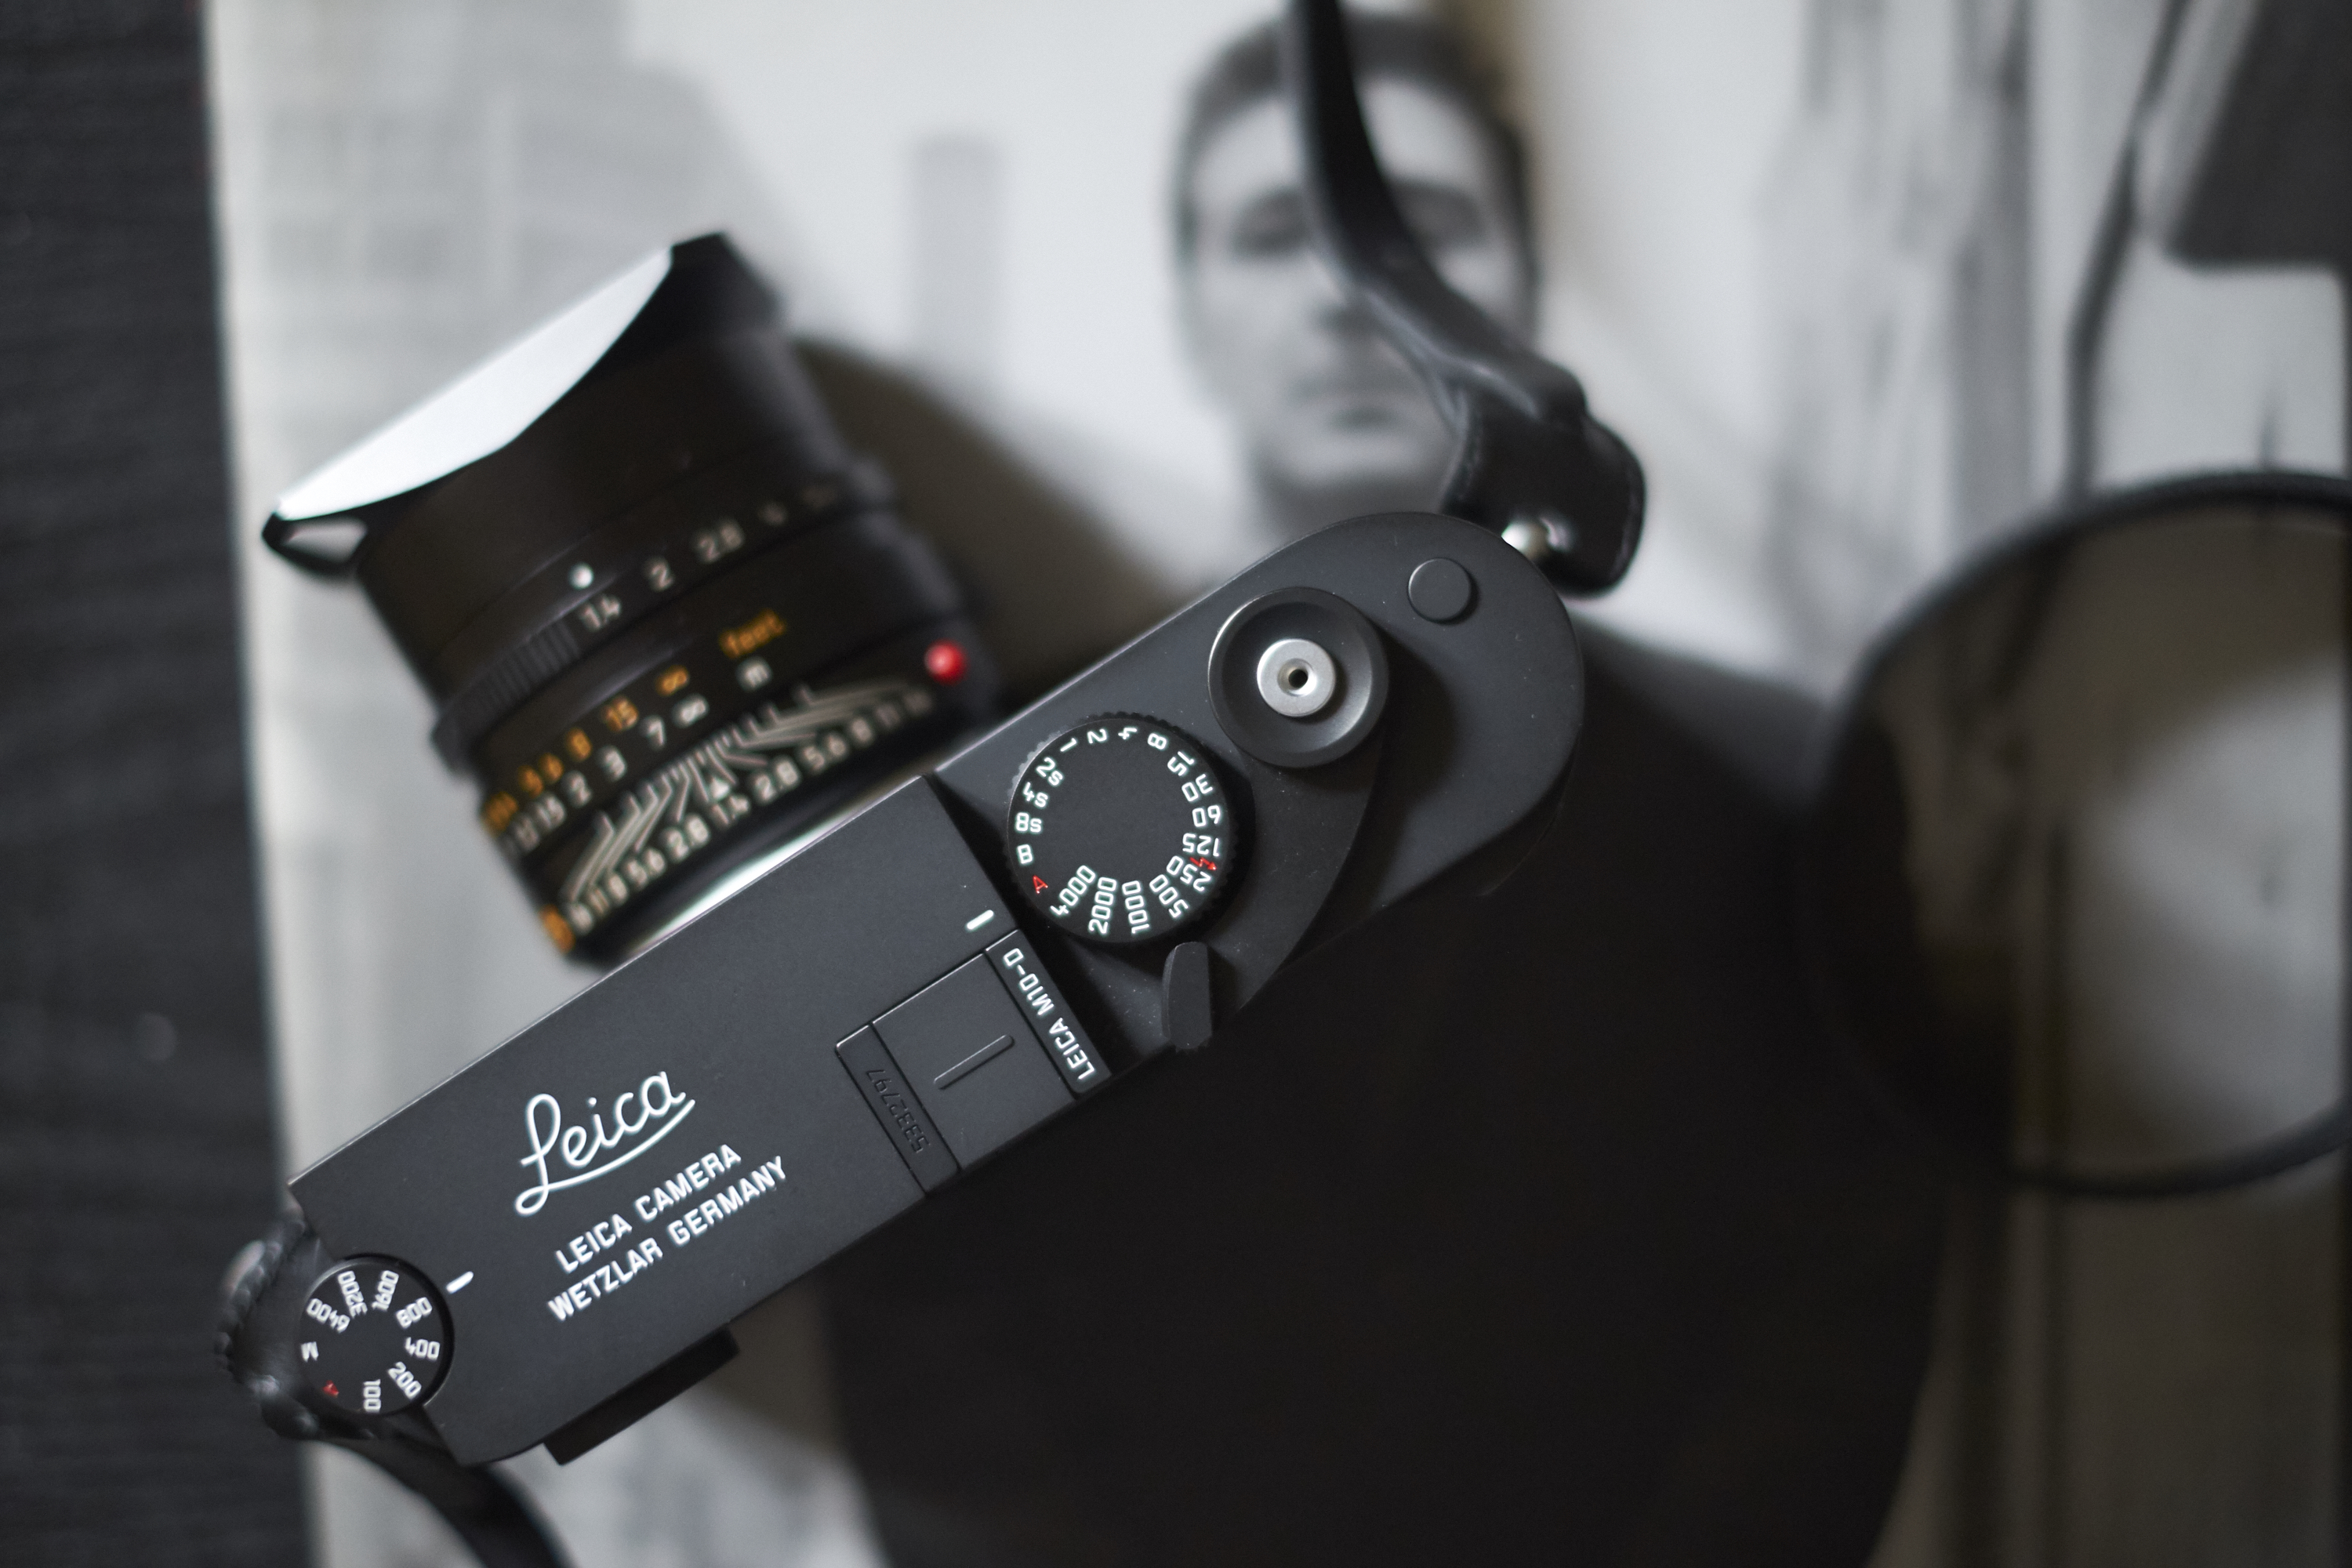 Review: Leica M10-D (Almost the Leica That I’ve Been Waiting For)